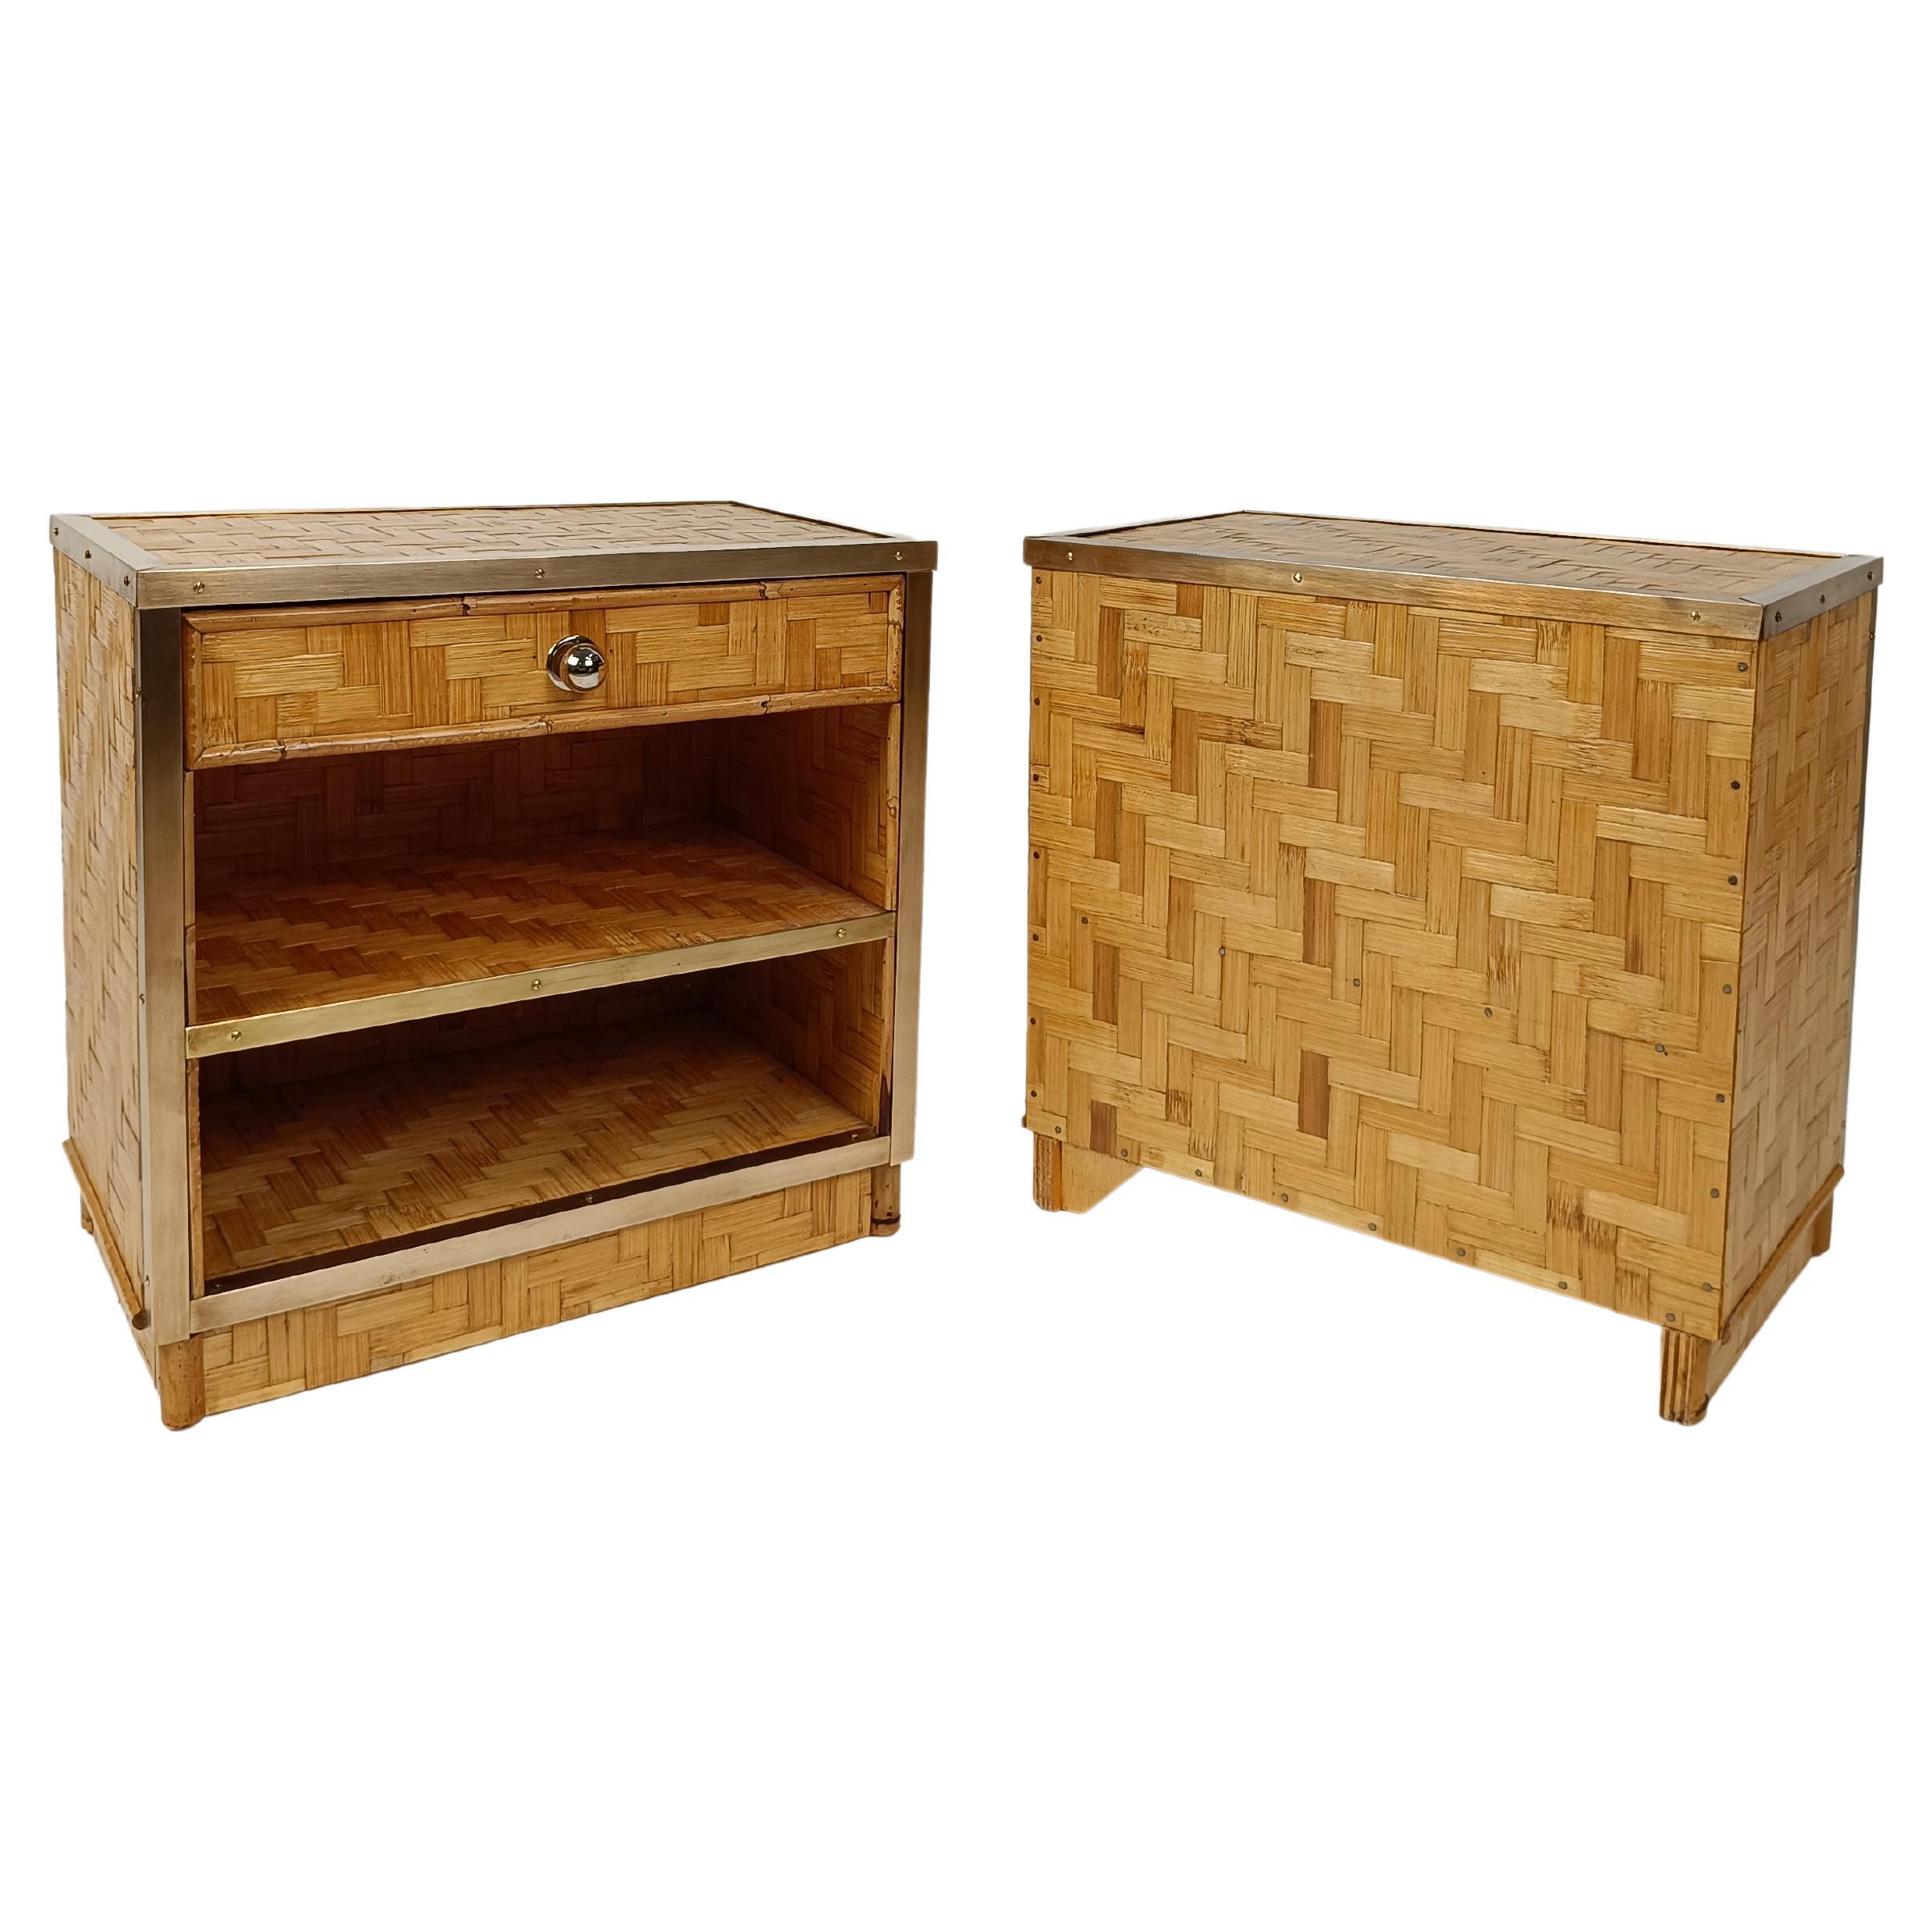 Midcentury Italian Bedside Tables in Bamboo Cane, Rattan and Brass, 1970s For Sale